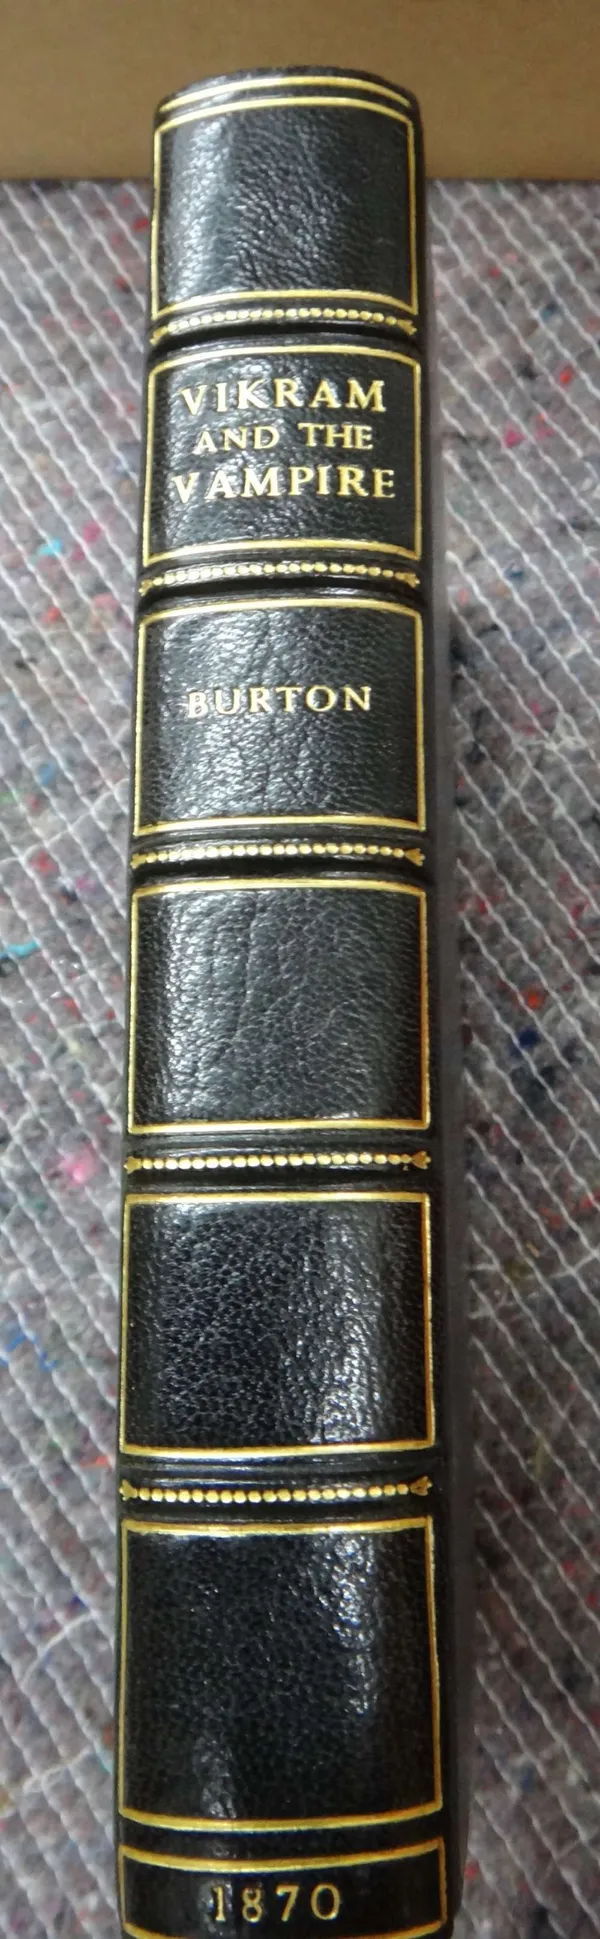 BURTON (R.F.)  Vikram and the Vampire or Tales of Hindu Devilry  . . .  First Edition. 16 plates & some text illus. (by Ernest Griset), half title; ne